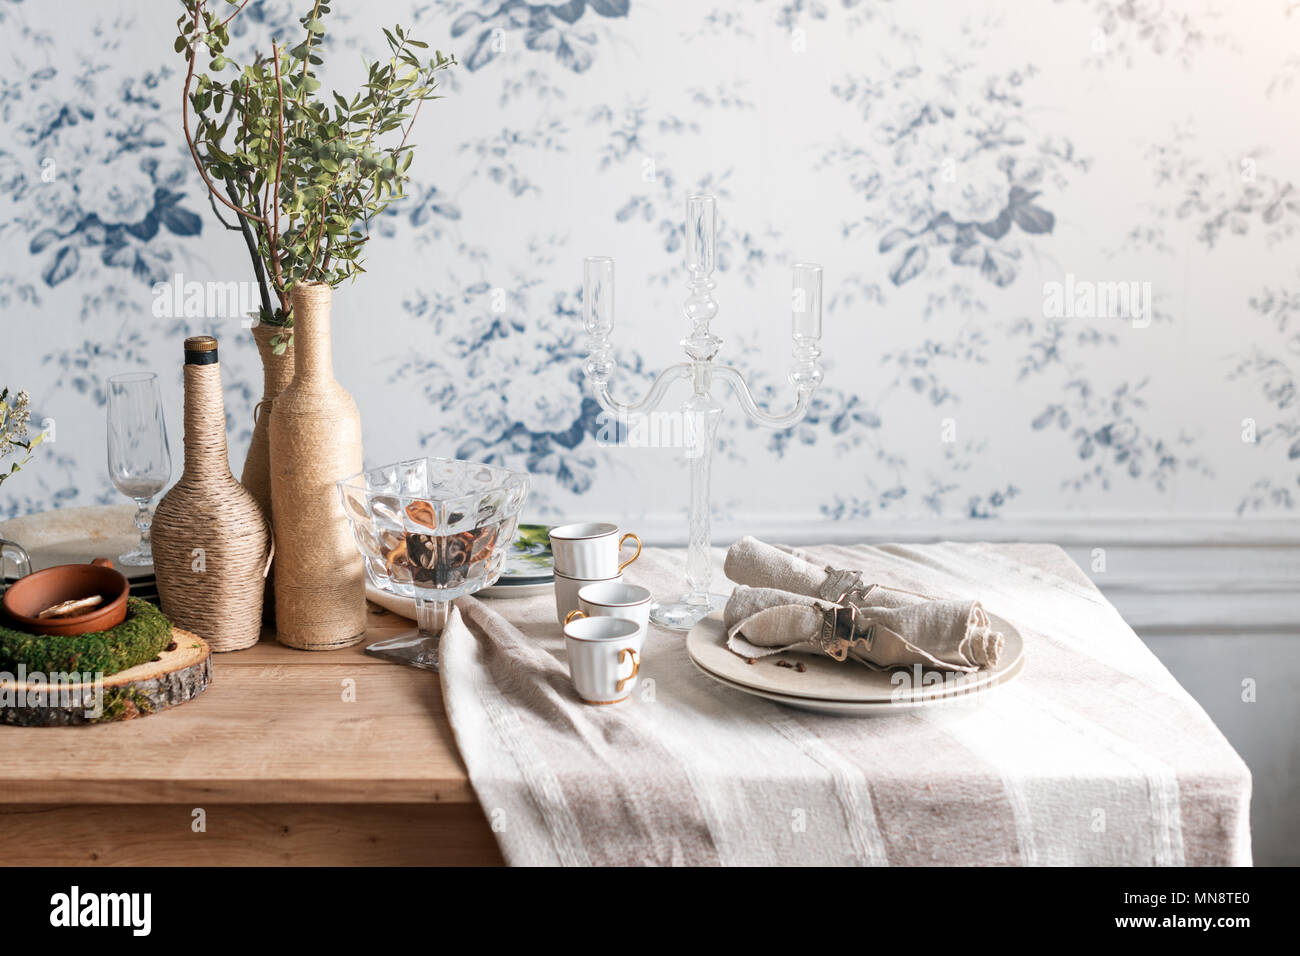 Rustic table setting. Eco friendly design Vintage interior with wood, antique cups, dishes and cutlery. Stock Photo